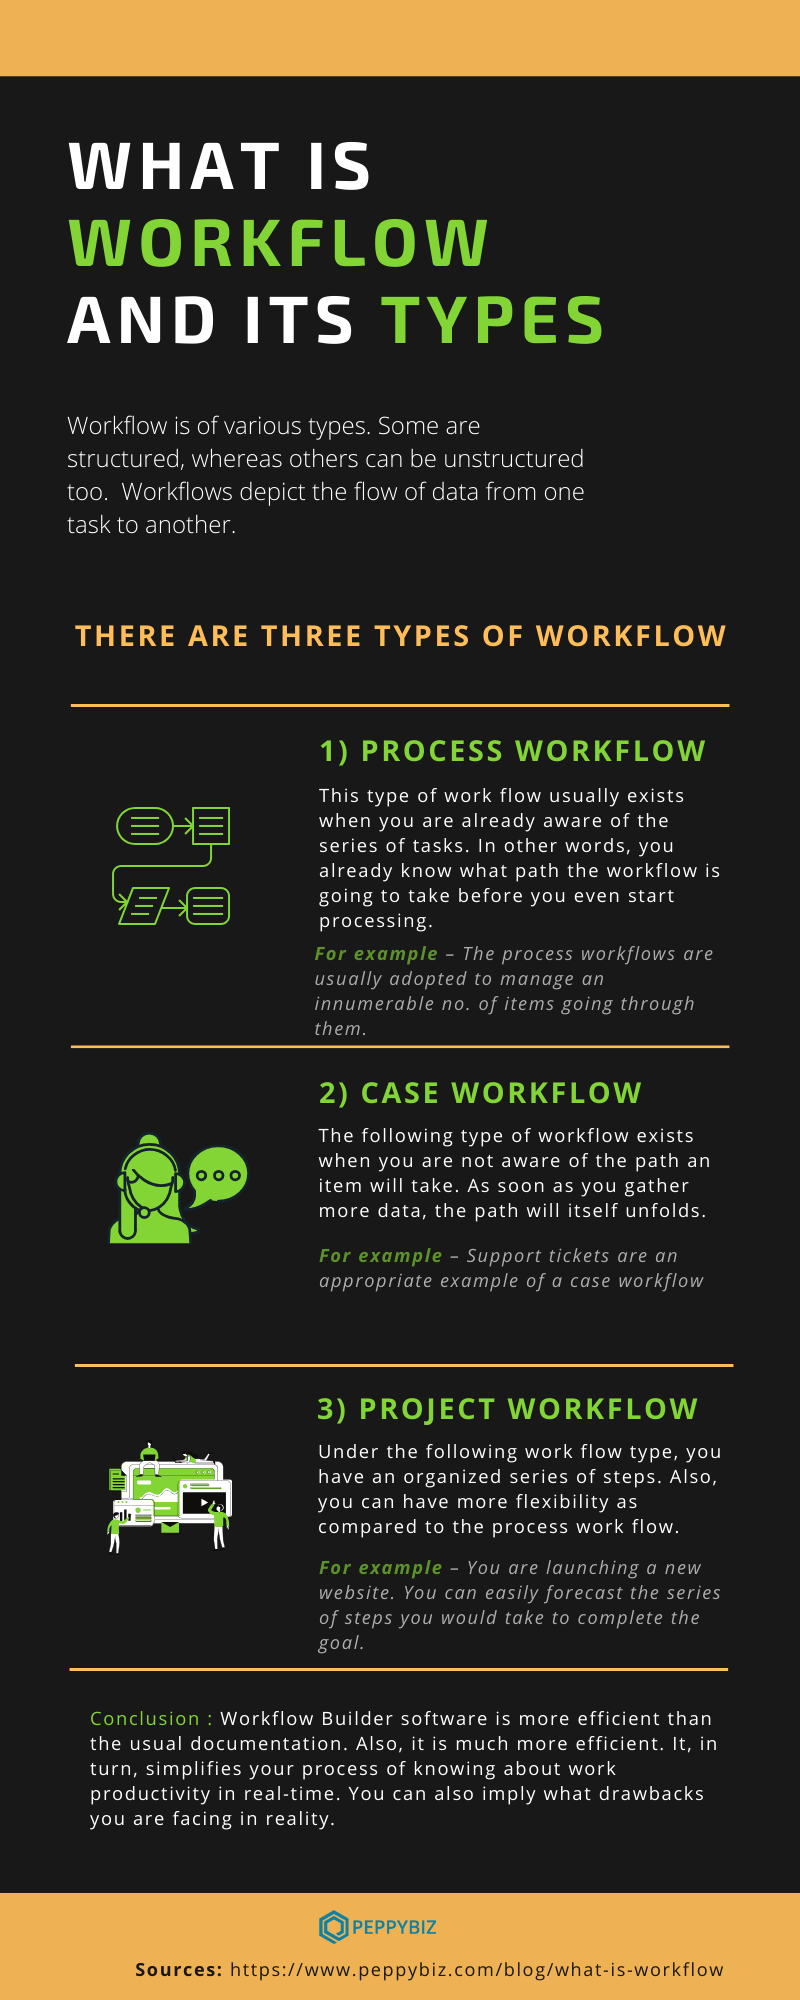 What is Workflow and its Types